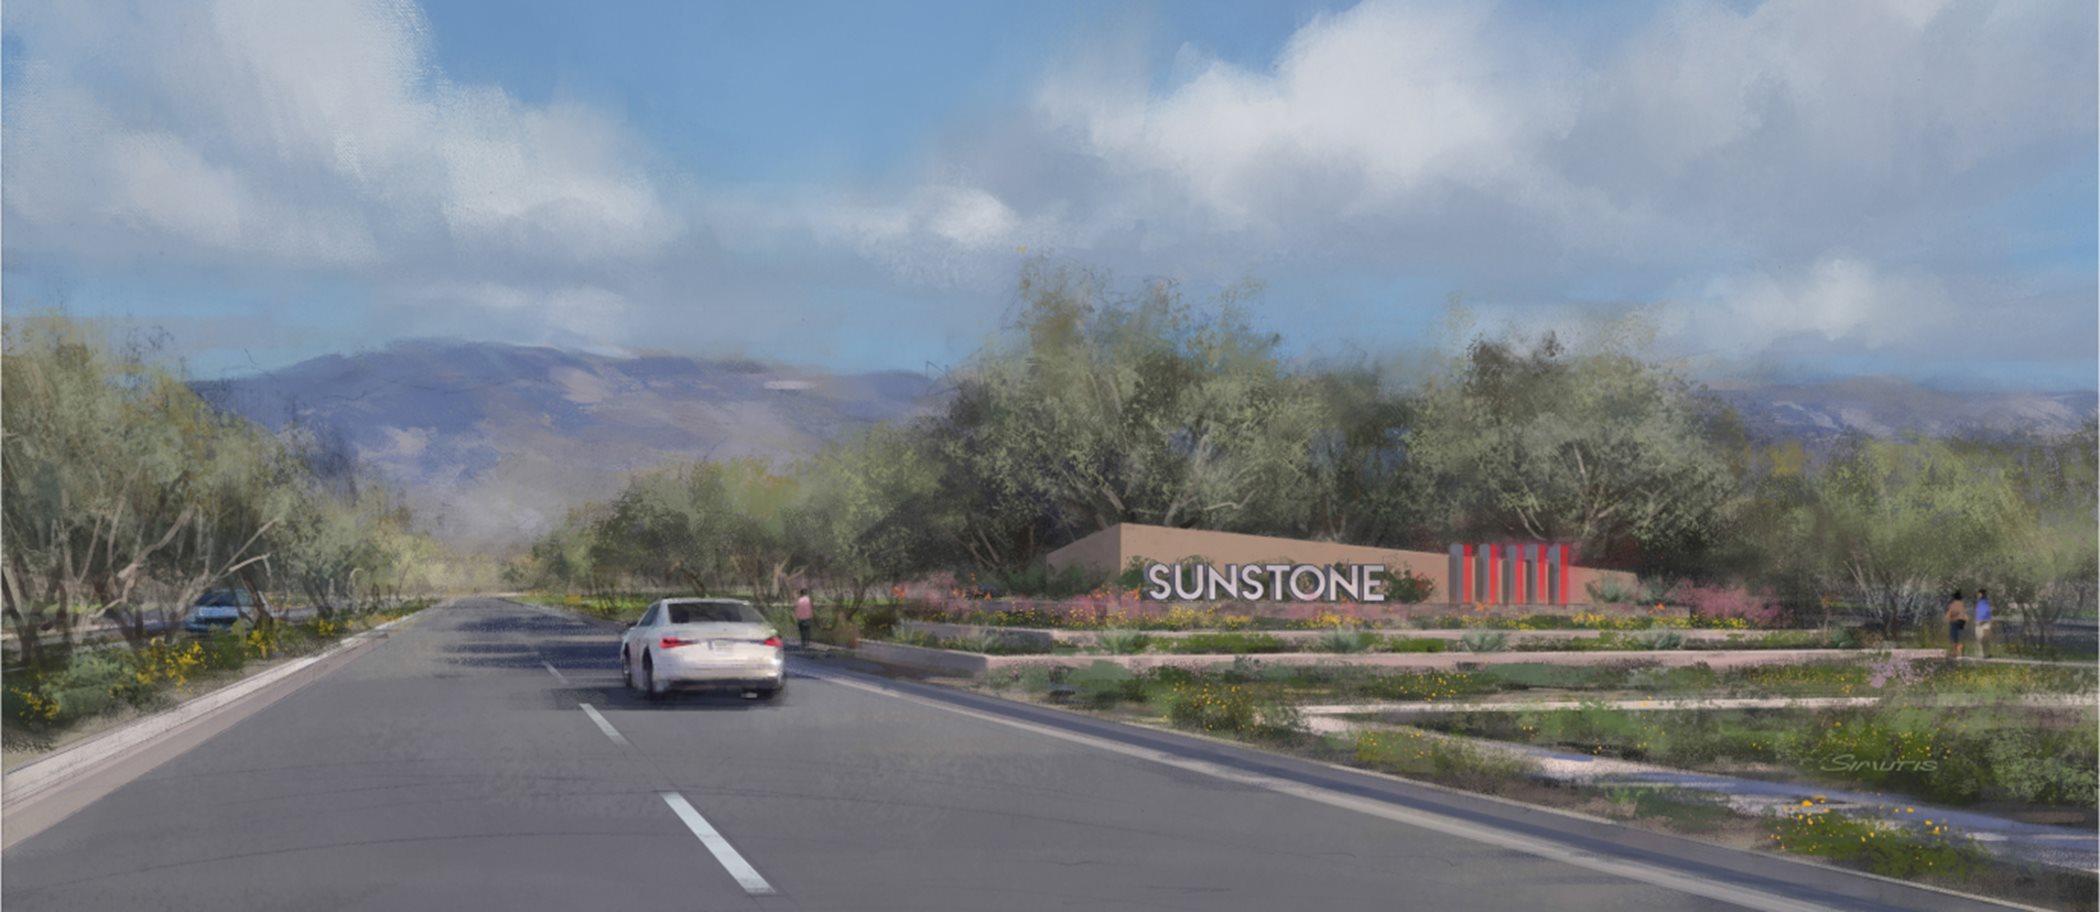 Sunstone welcome sign 